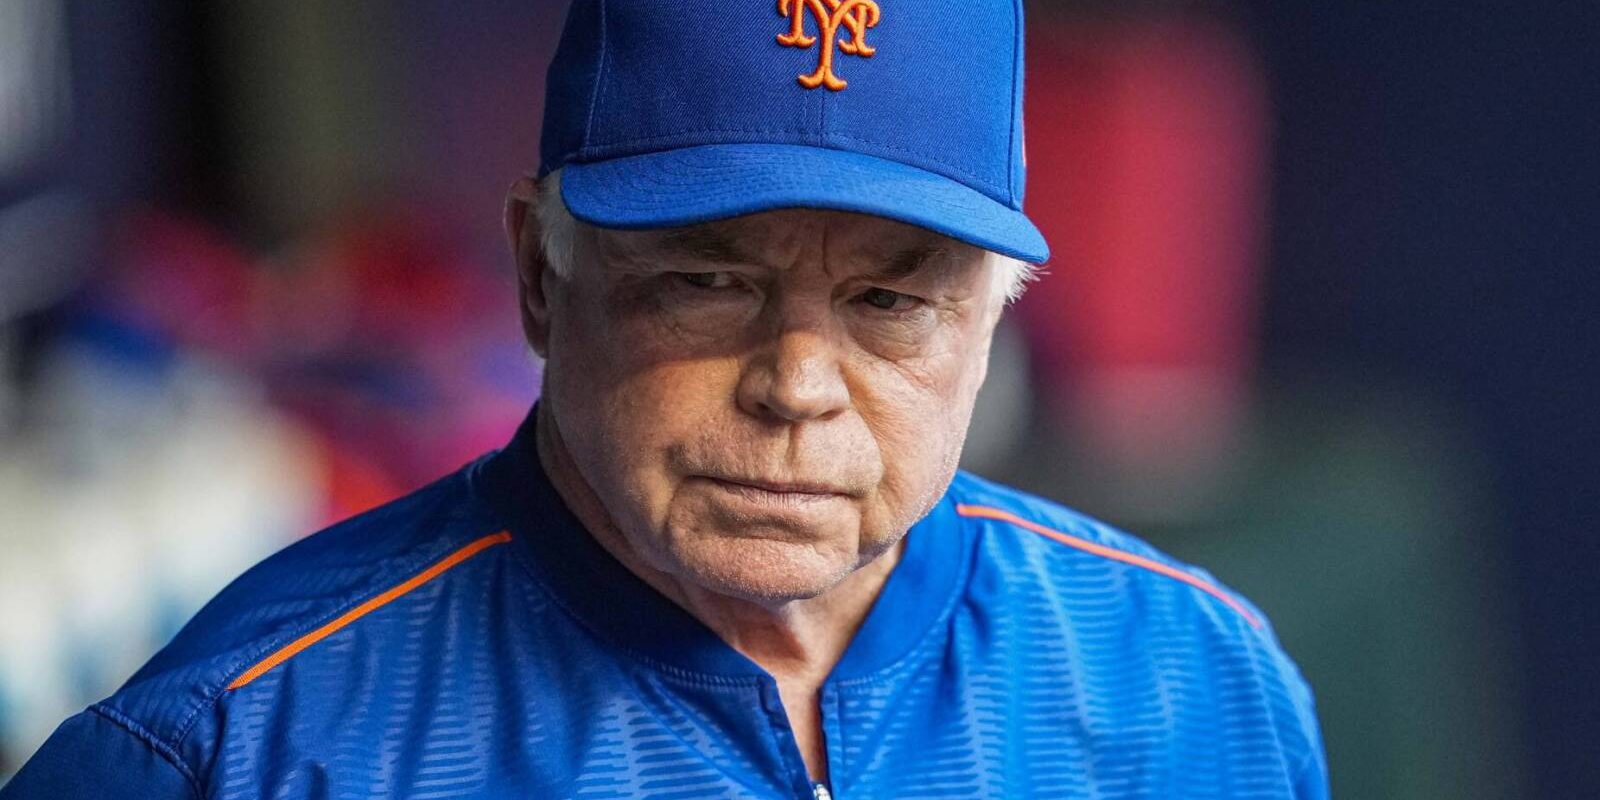 Aug 23, 2023; Cumberland, Georgia, USA; New York Mets manager Buck Showalter (11) shown in the dugout against the Atlanta Braves during the first inning at Truist Park. Mandatory Credit: Dale Zanine-USA TODAY Sports